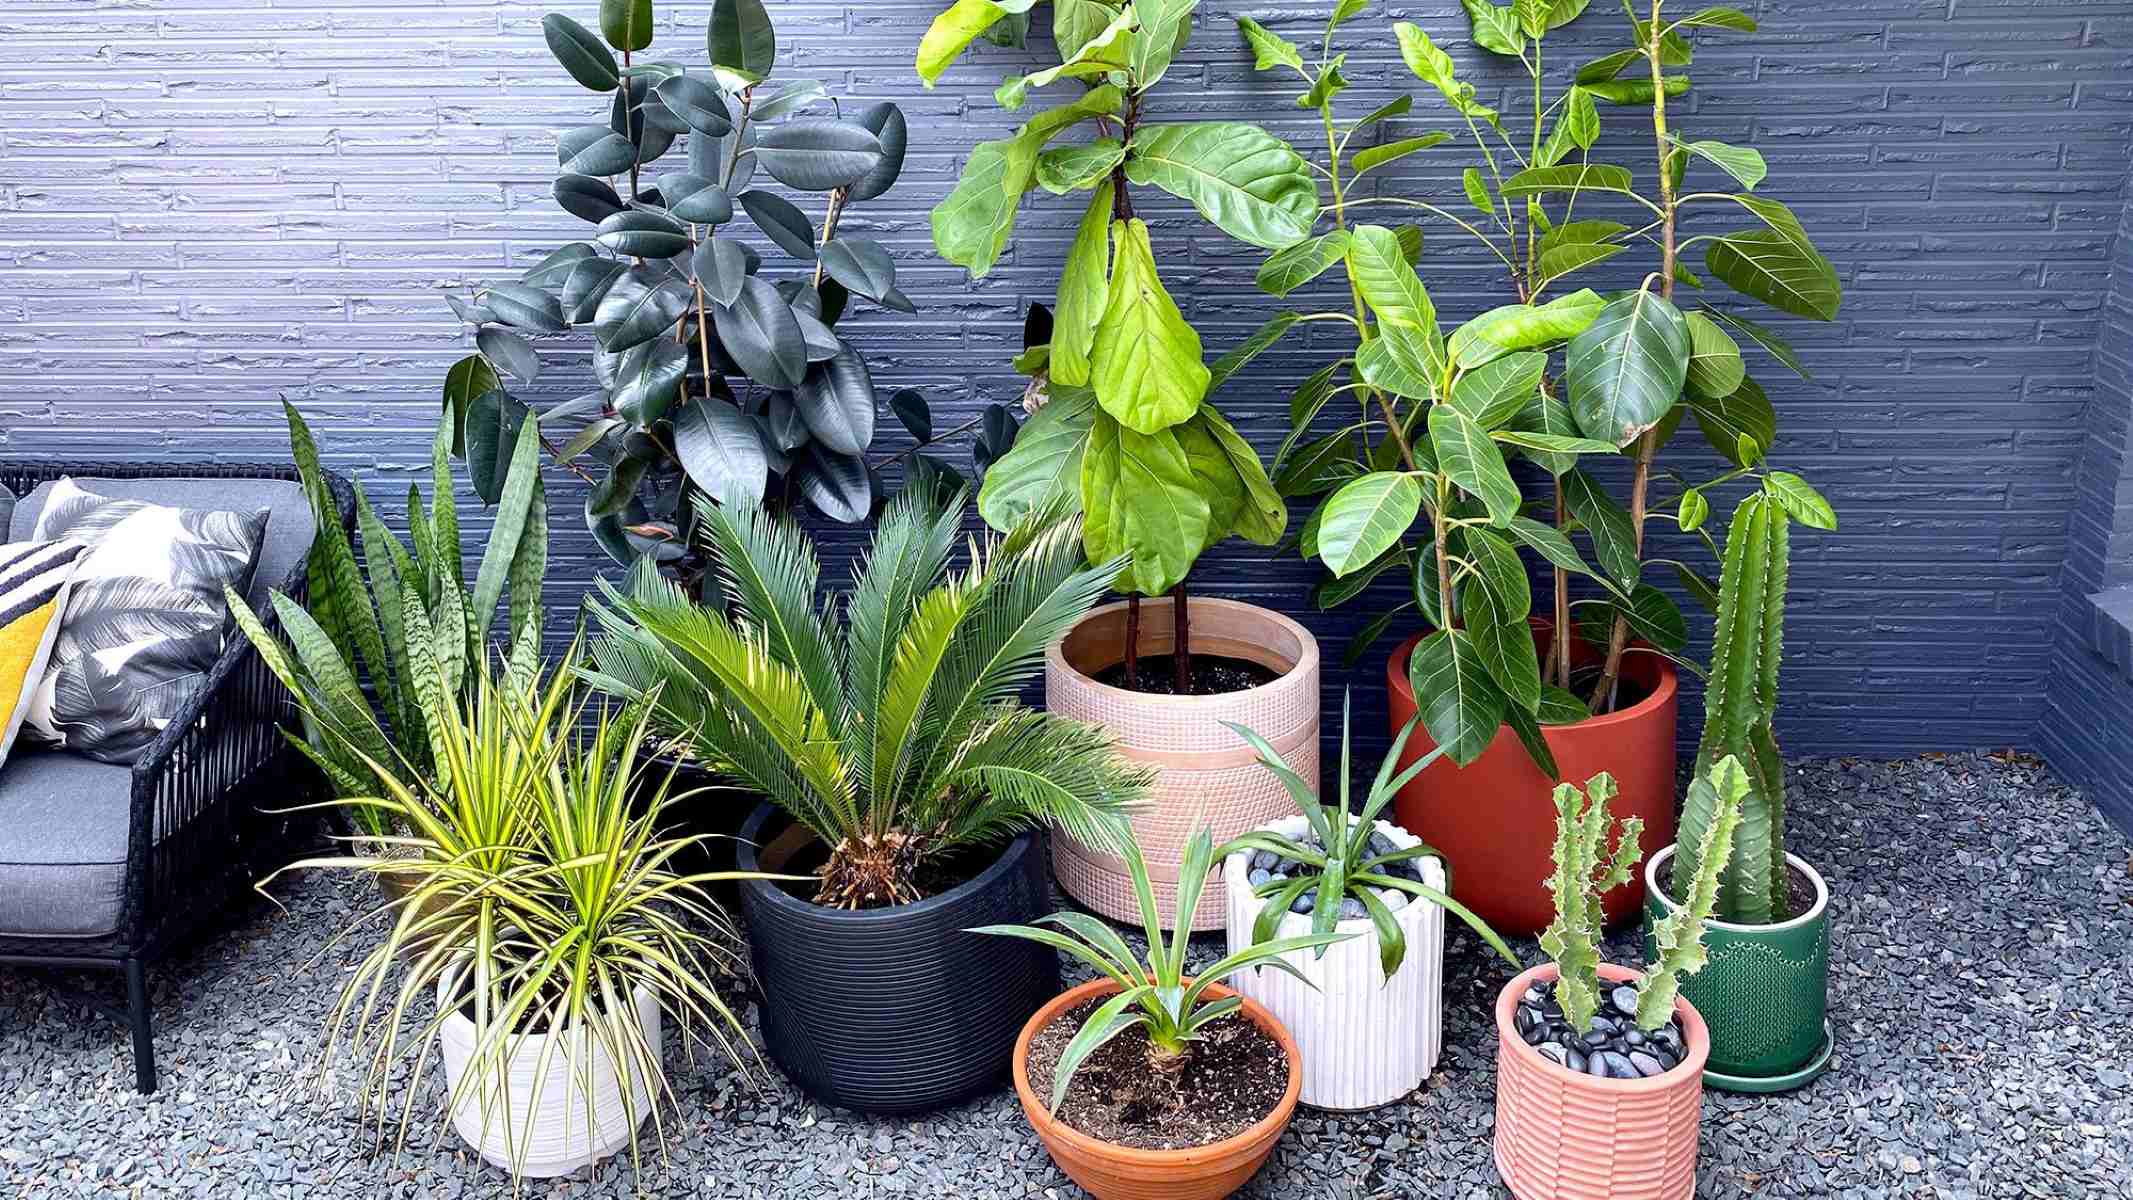 How To Plant In Pots With Drainage Holes